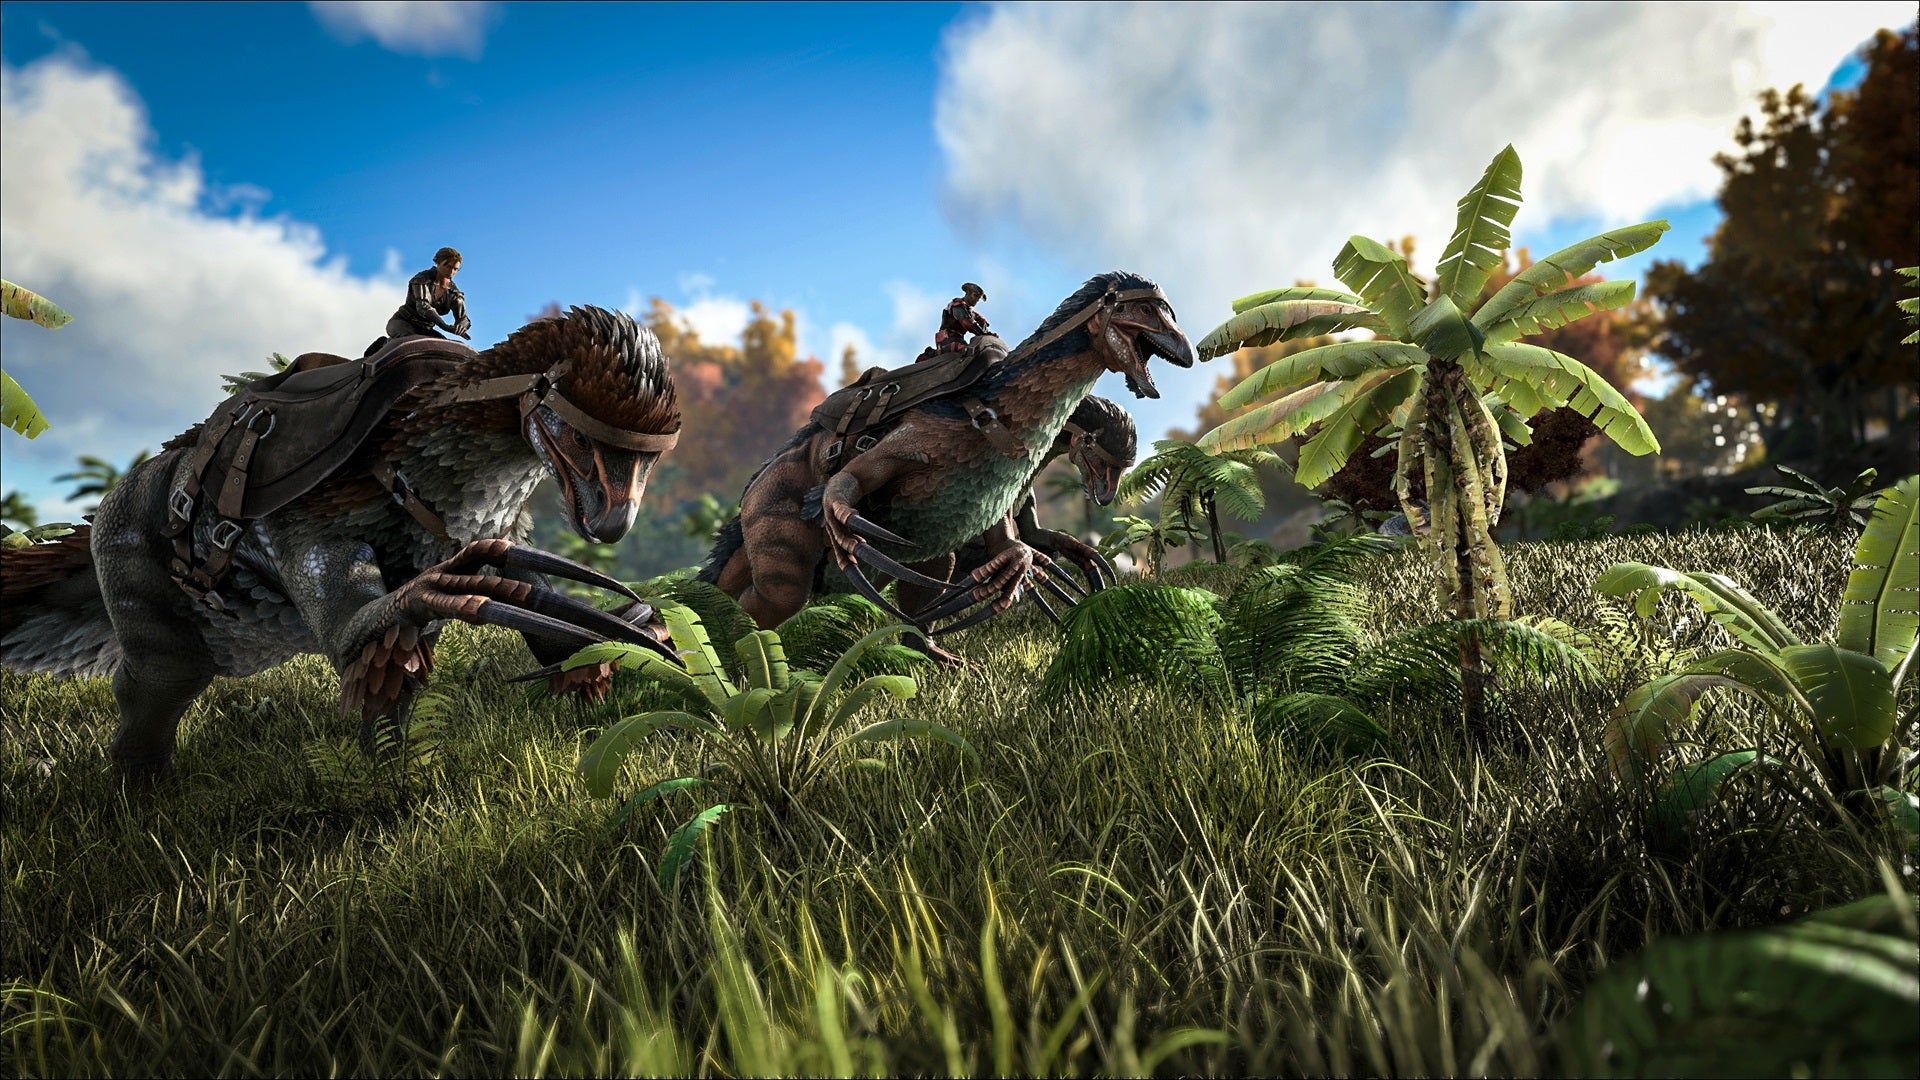 Download do APK de ARK Survival Evolved Wallpapers para Android